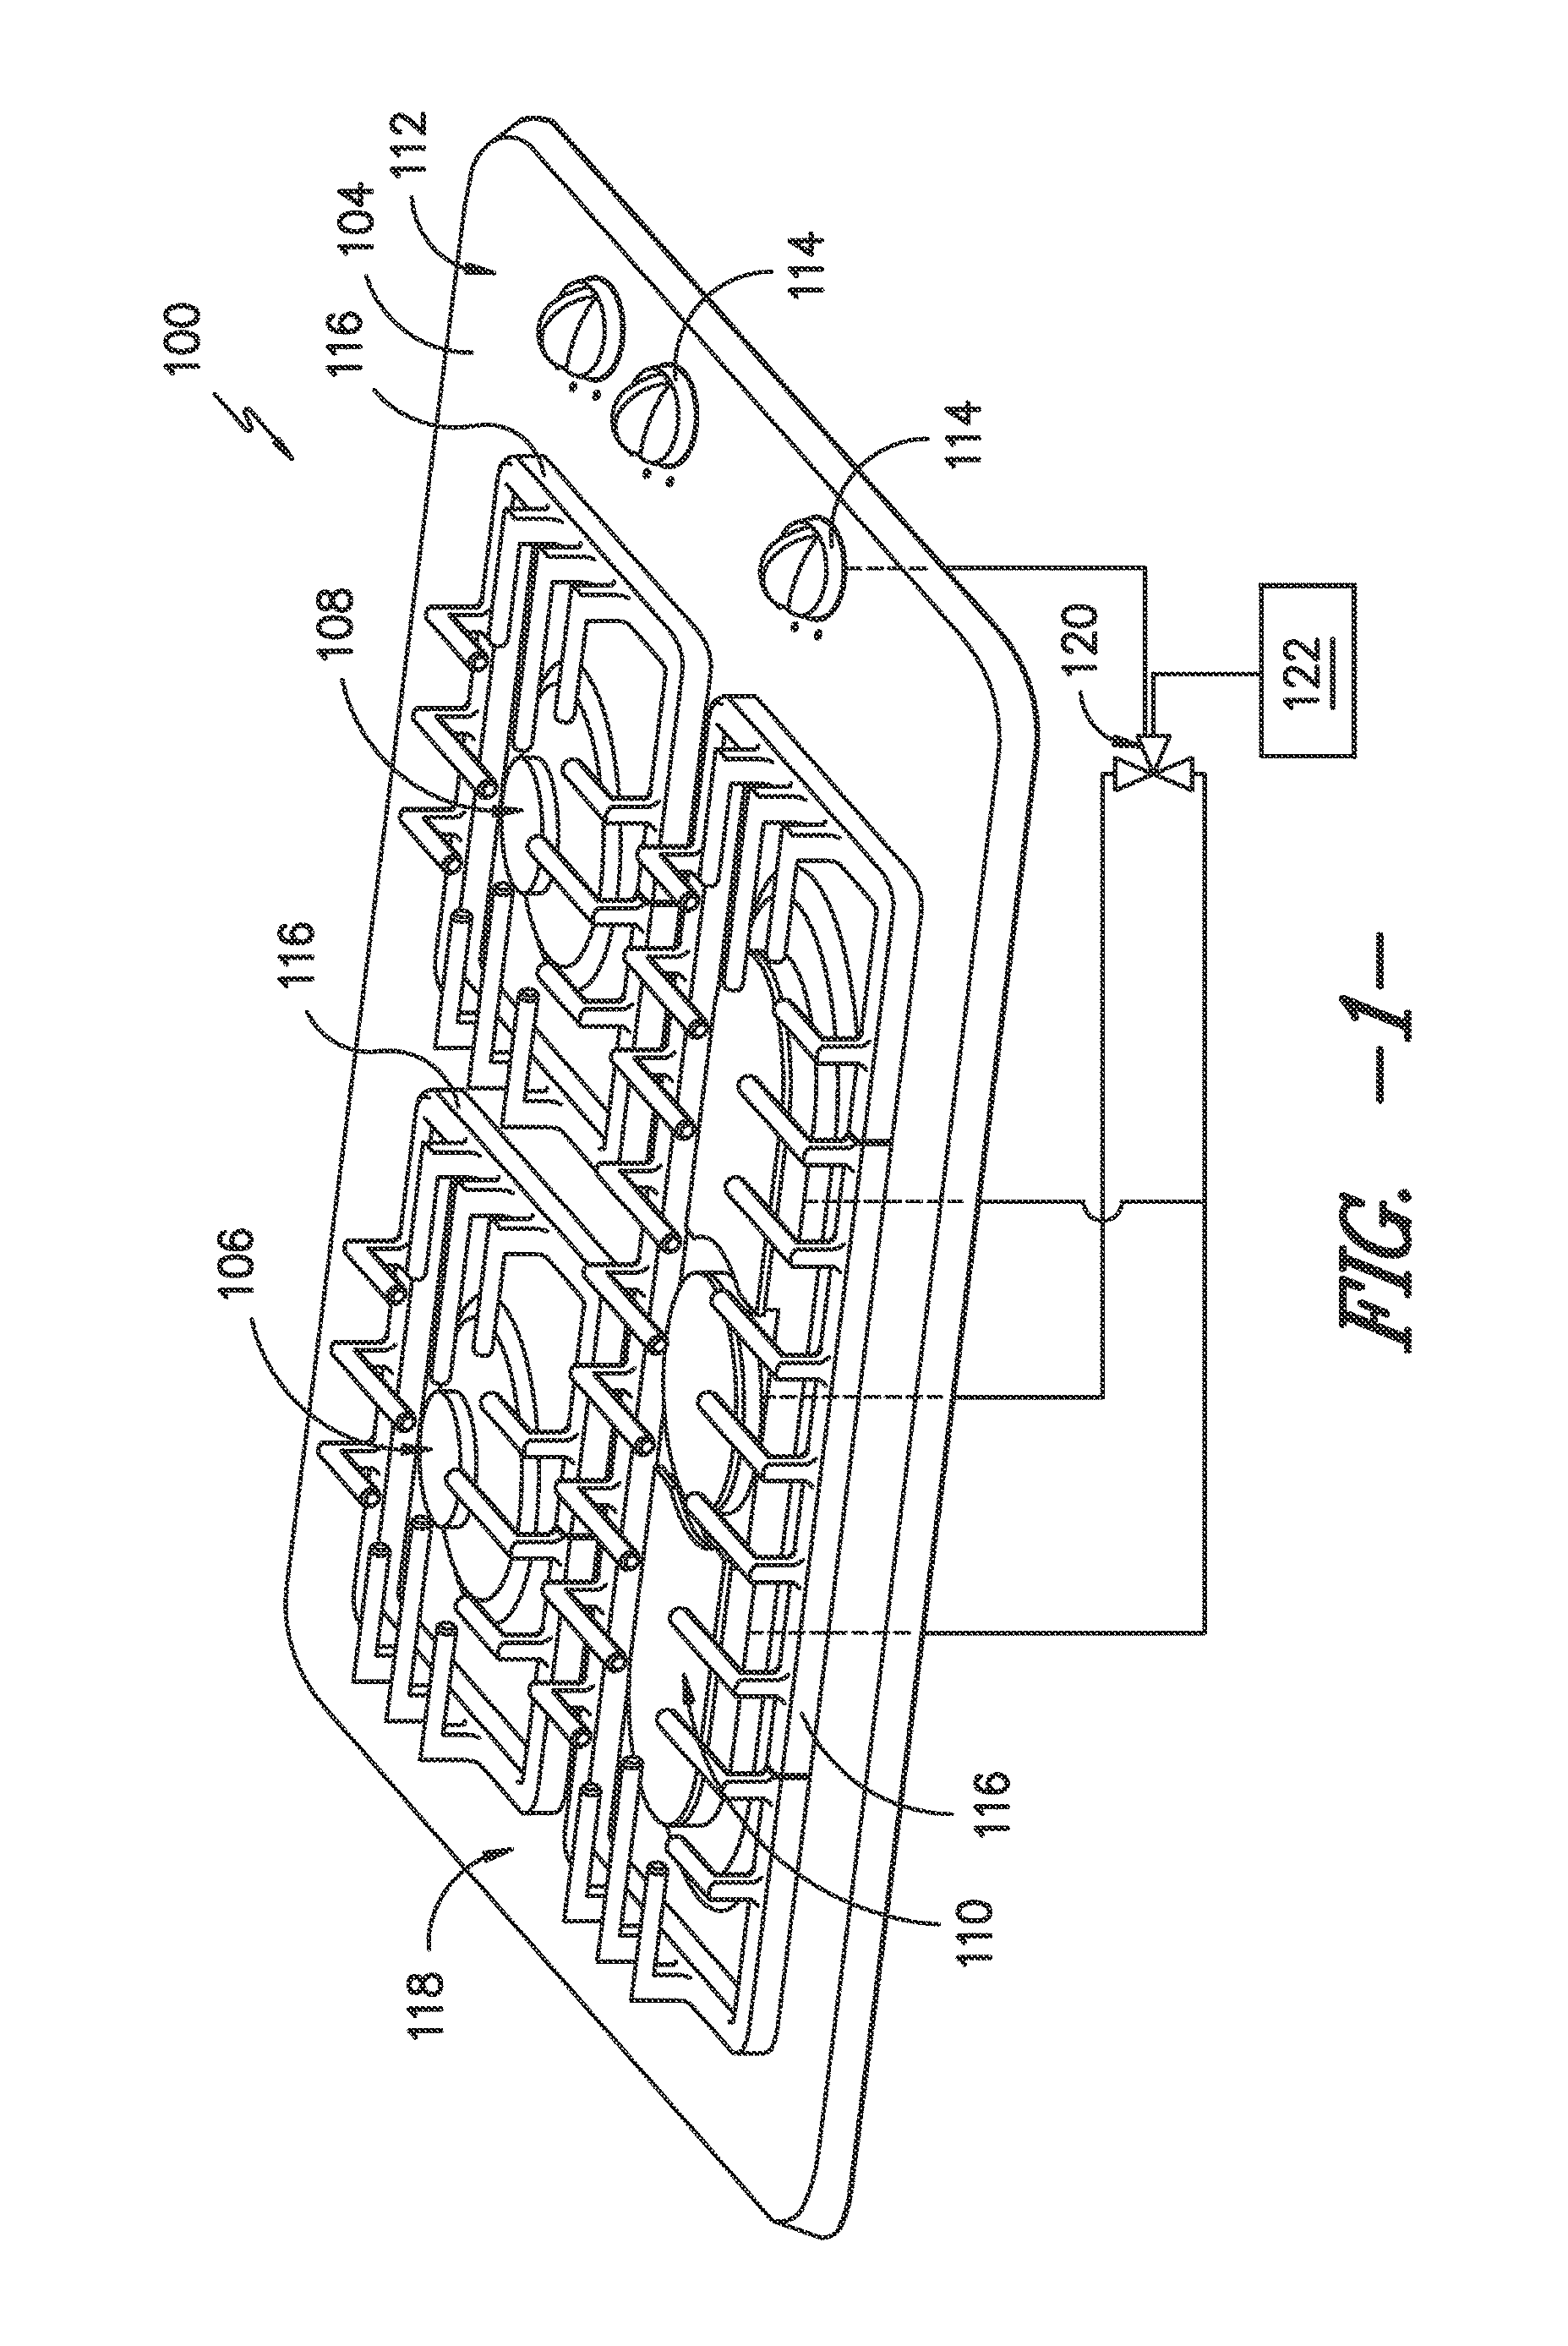 Burner assembly for cooktop appliance and method for operating same